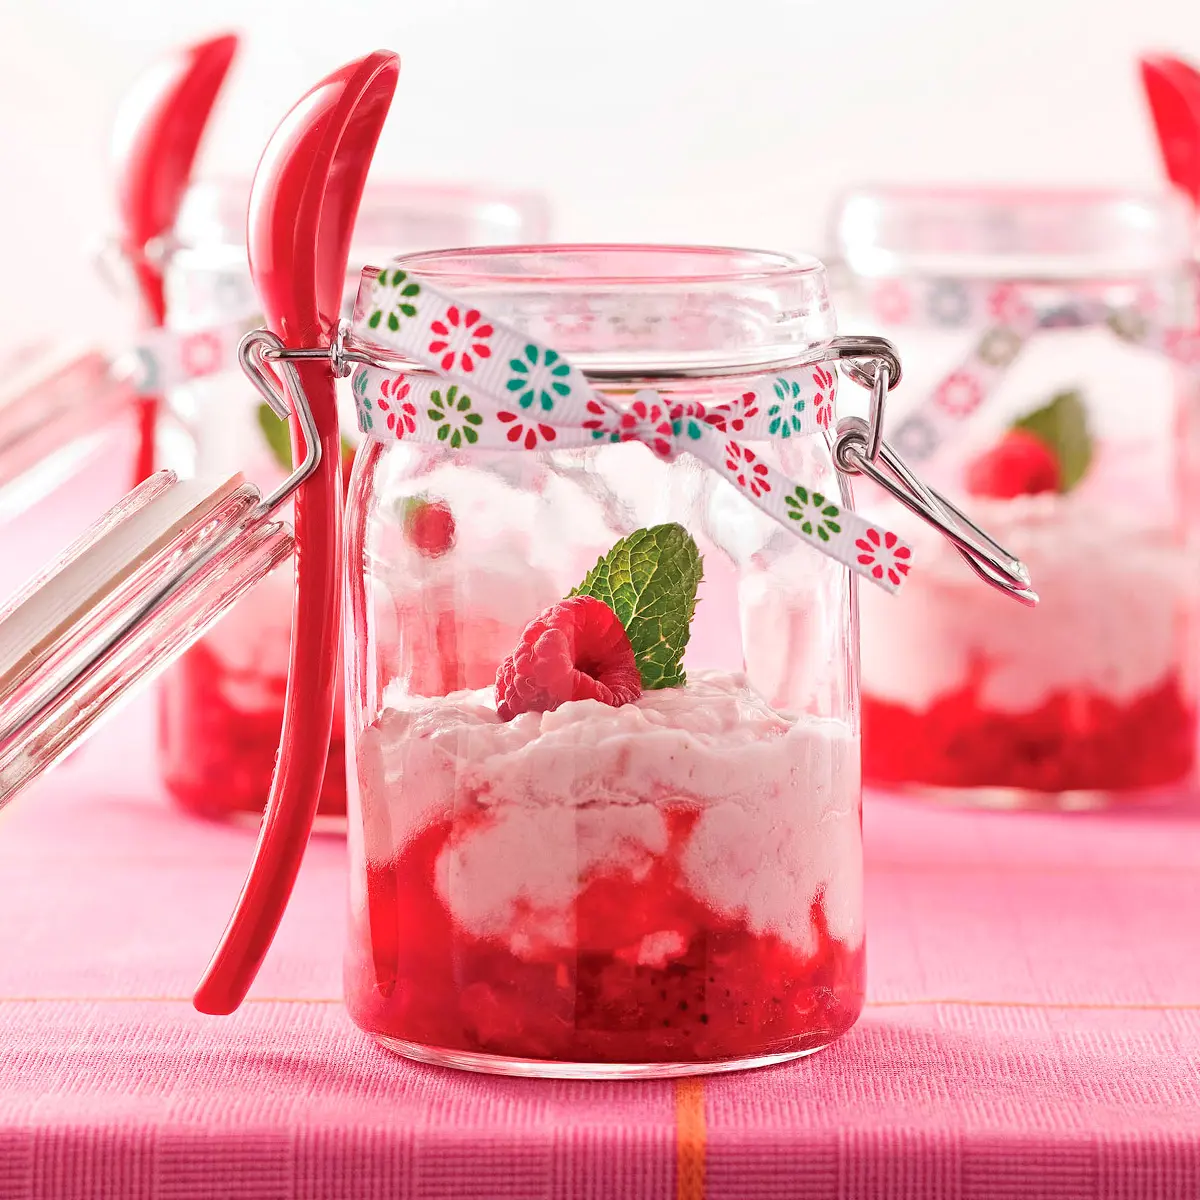 Strawberries and raspberries mousse